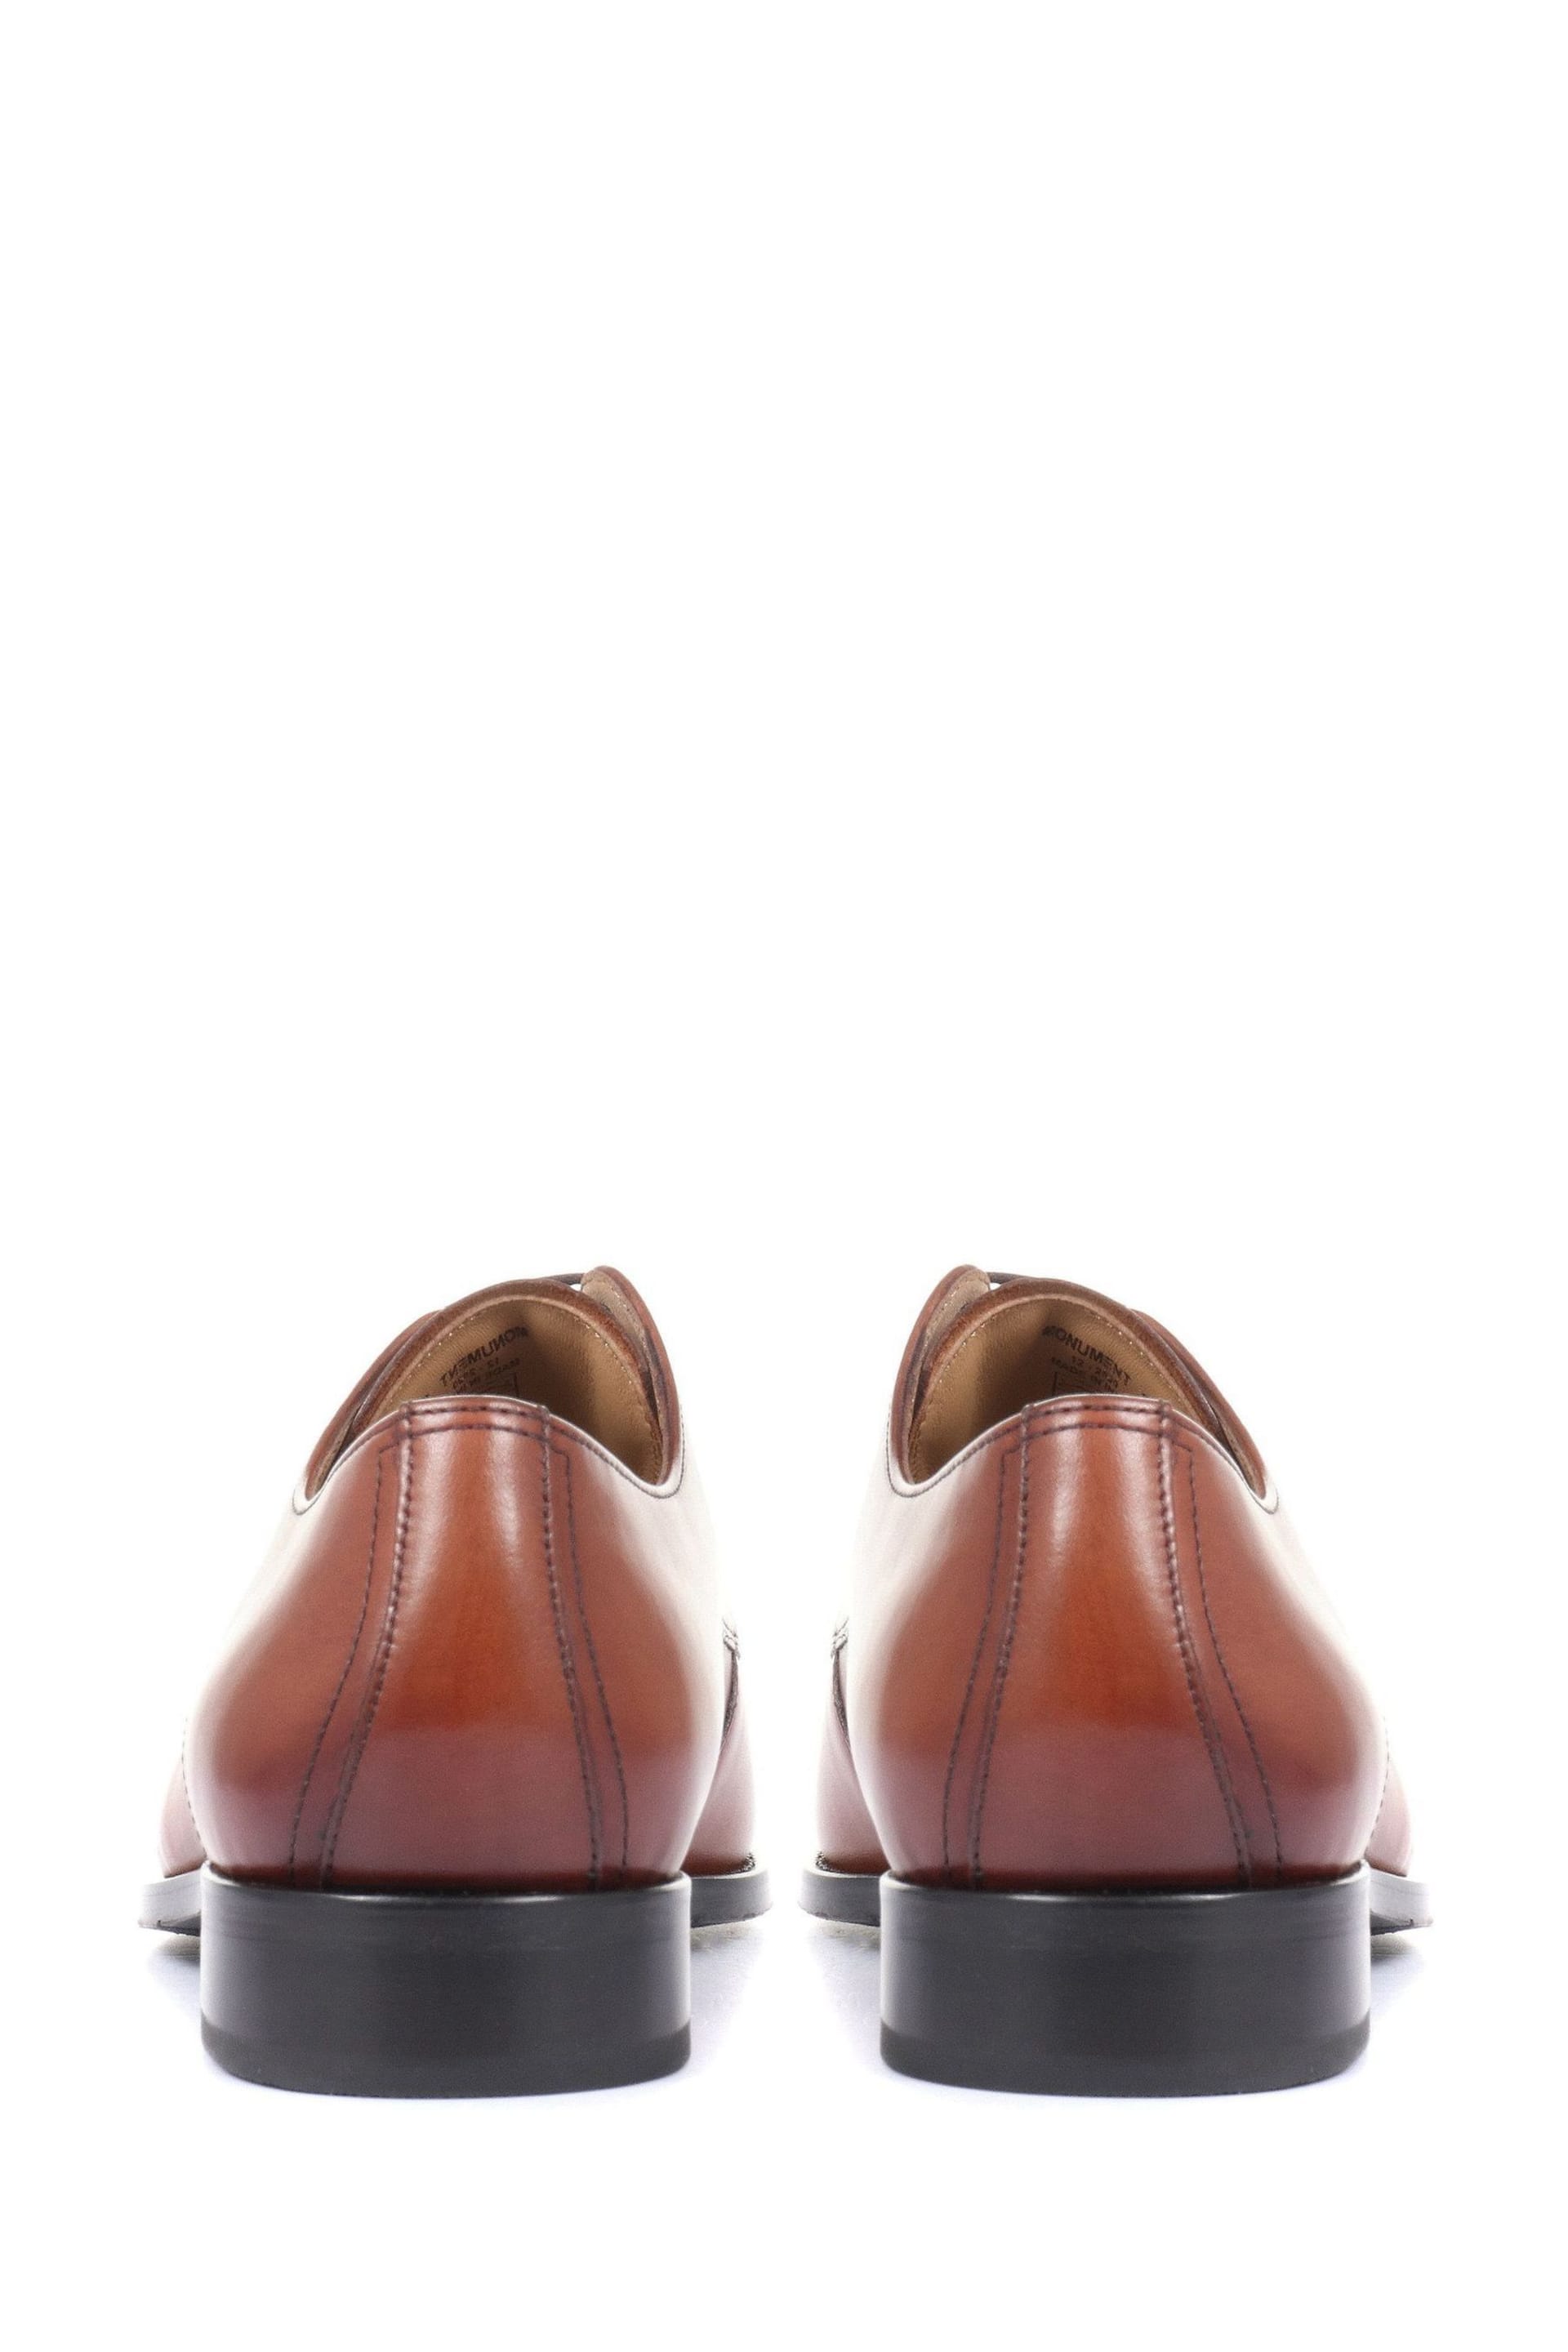 Jones Bootmaker Monument Leather Derby Shoes - Image 2 of 5